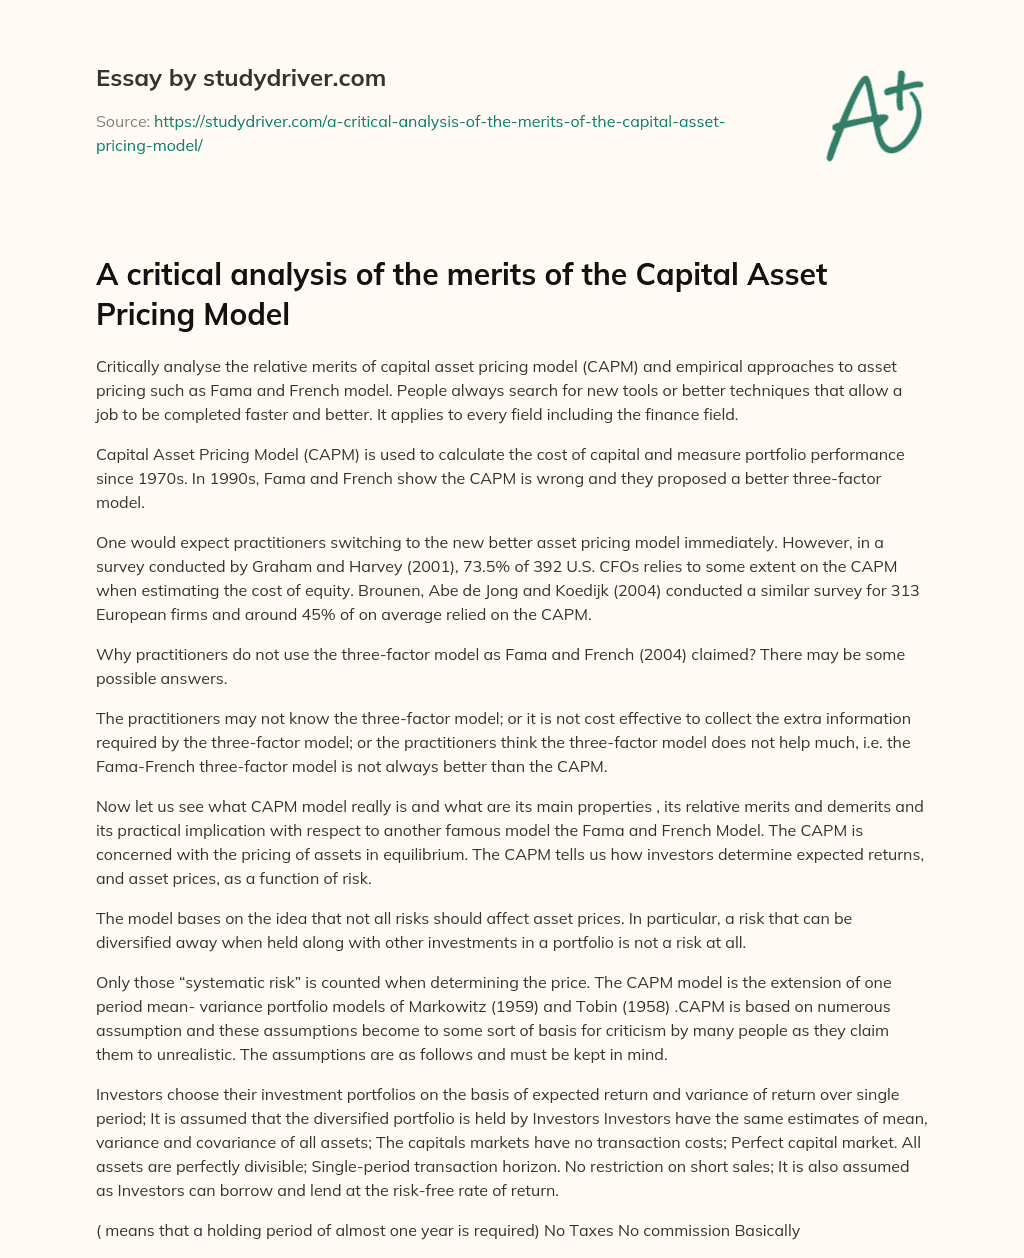 A Critical Analysis of the Merits of the Capital Asset Pricing Model essay